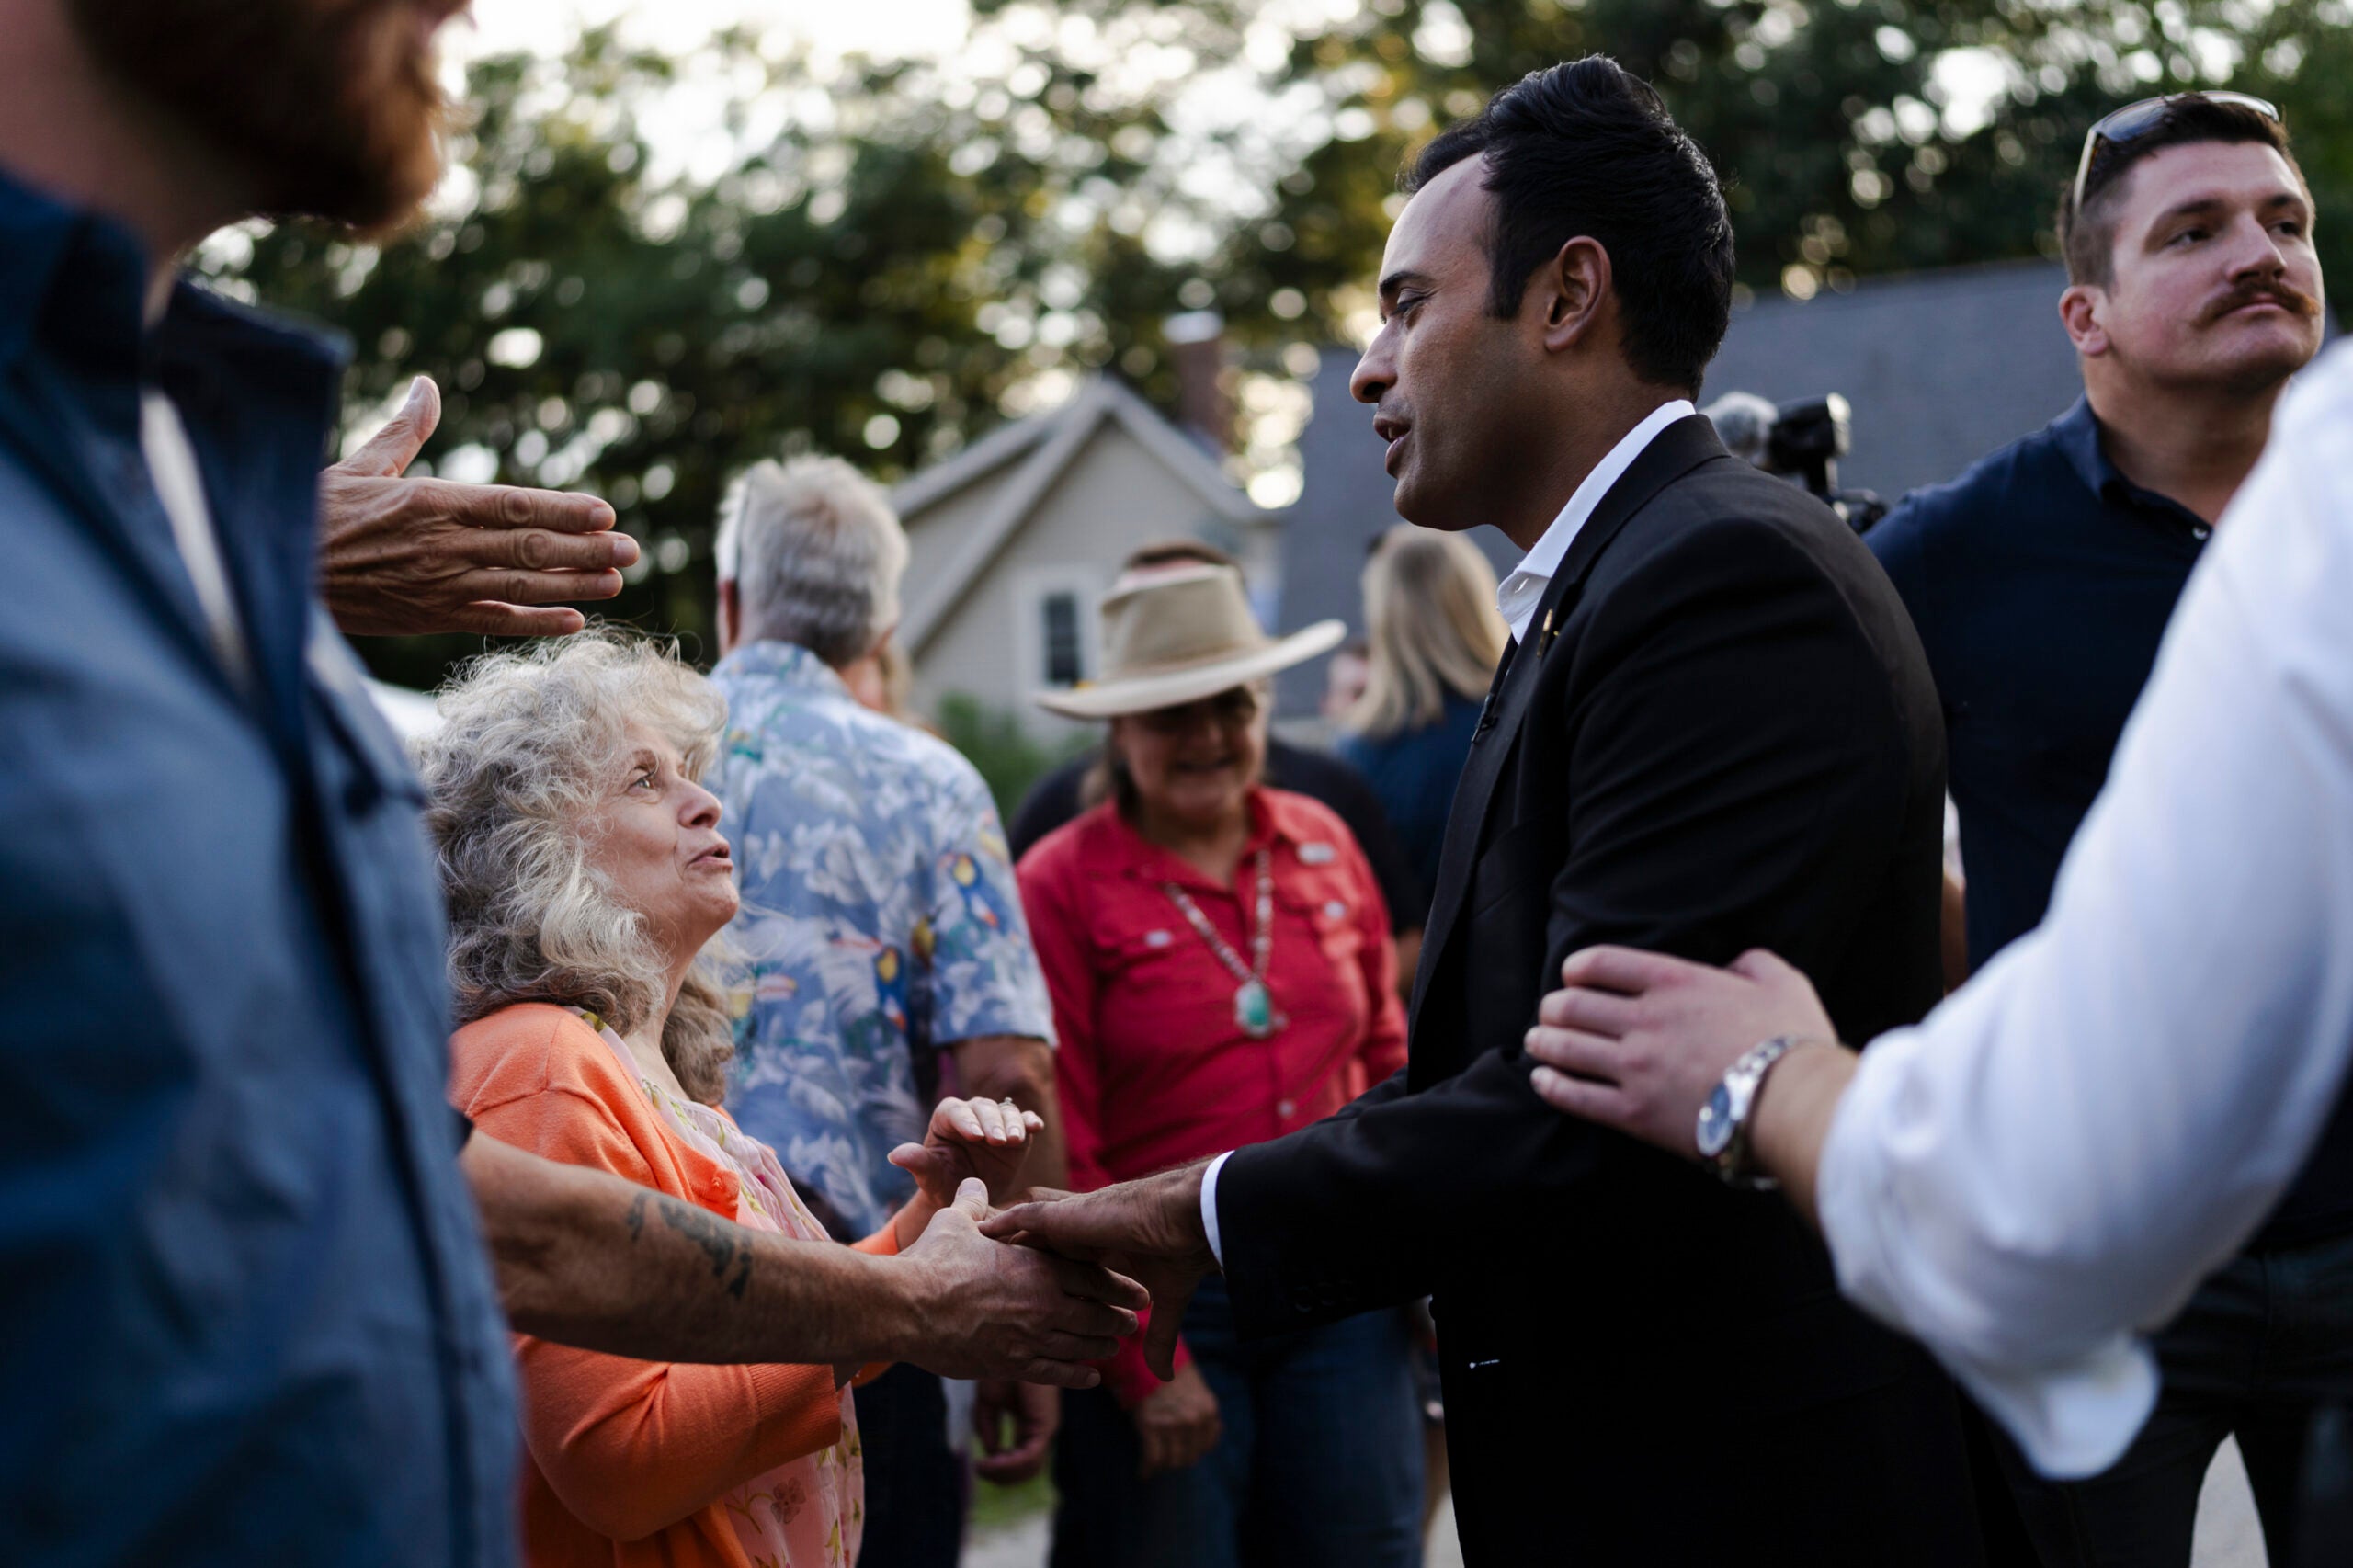 Vivek Ramaswamy, a candidate for the Republican presidential nomination, greets voters.